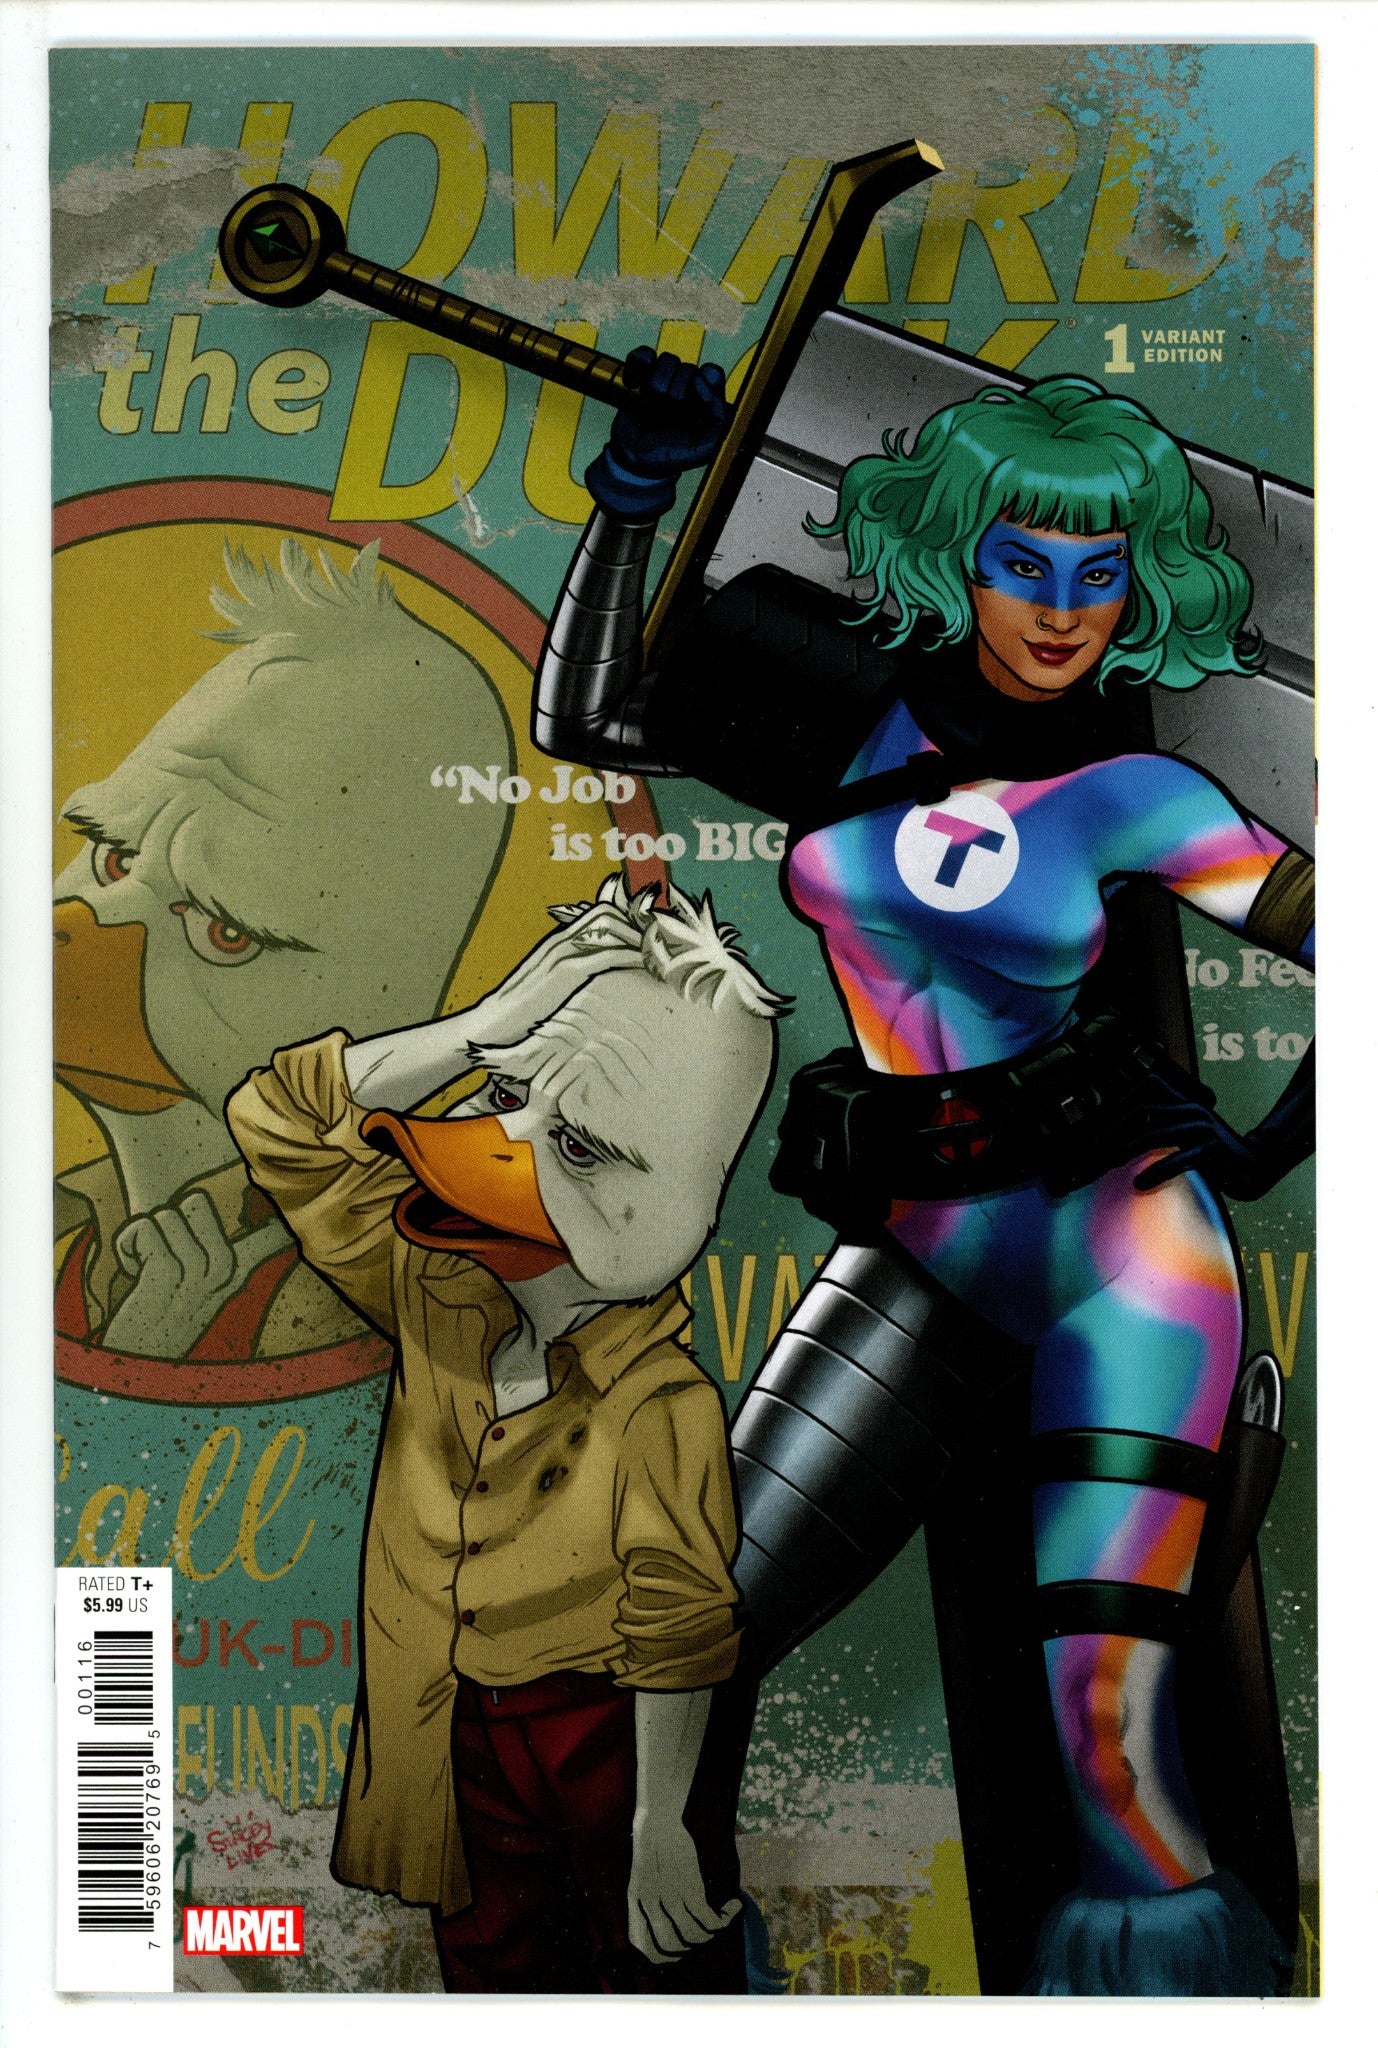 Howard the Duck Vol 6 1 VF/NM (9.0) (2013) Quinones Incentive Variant 